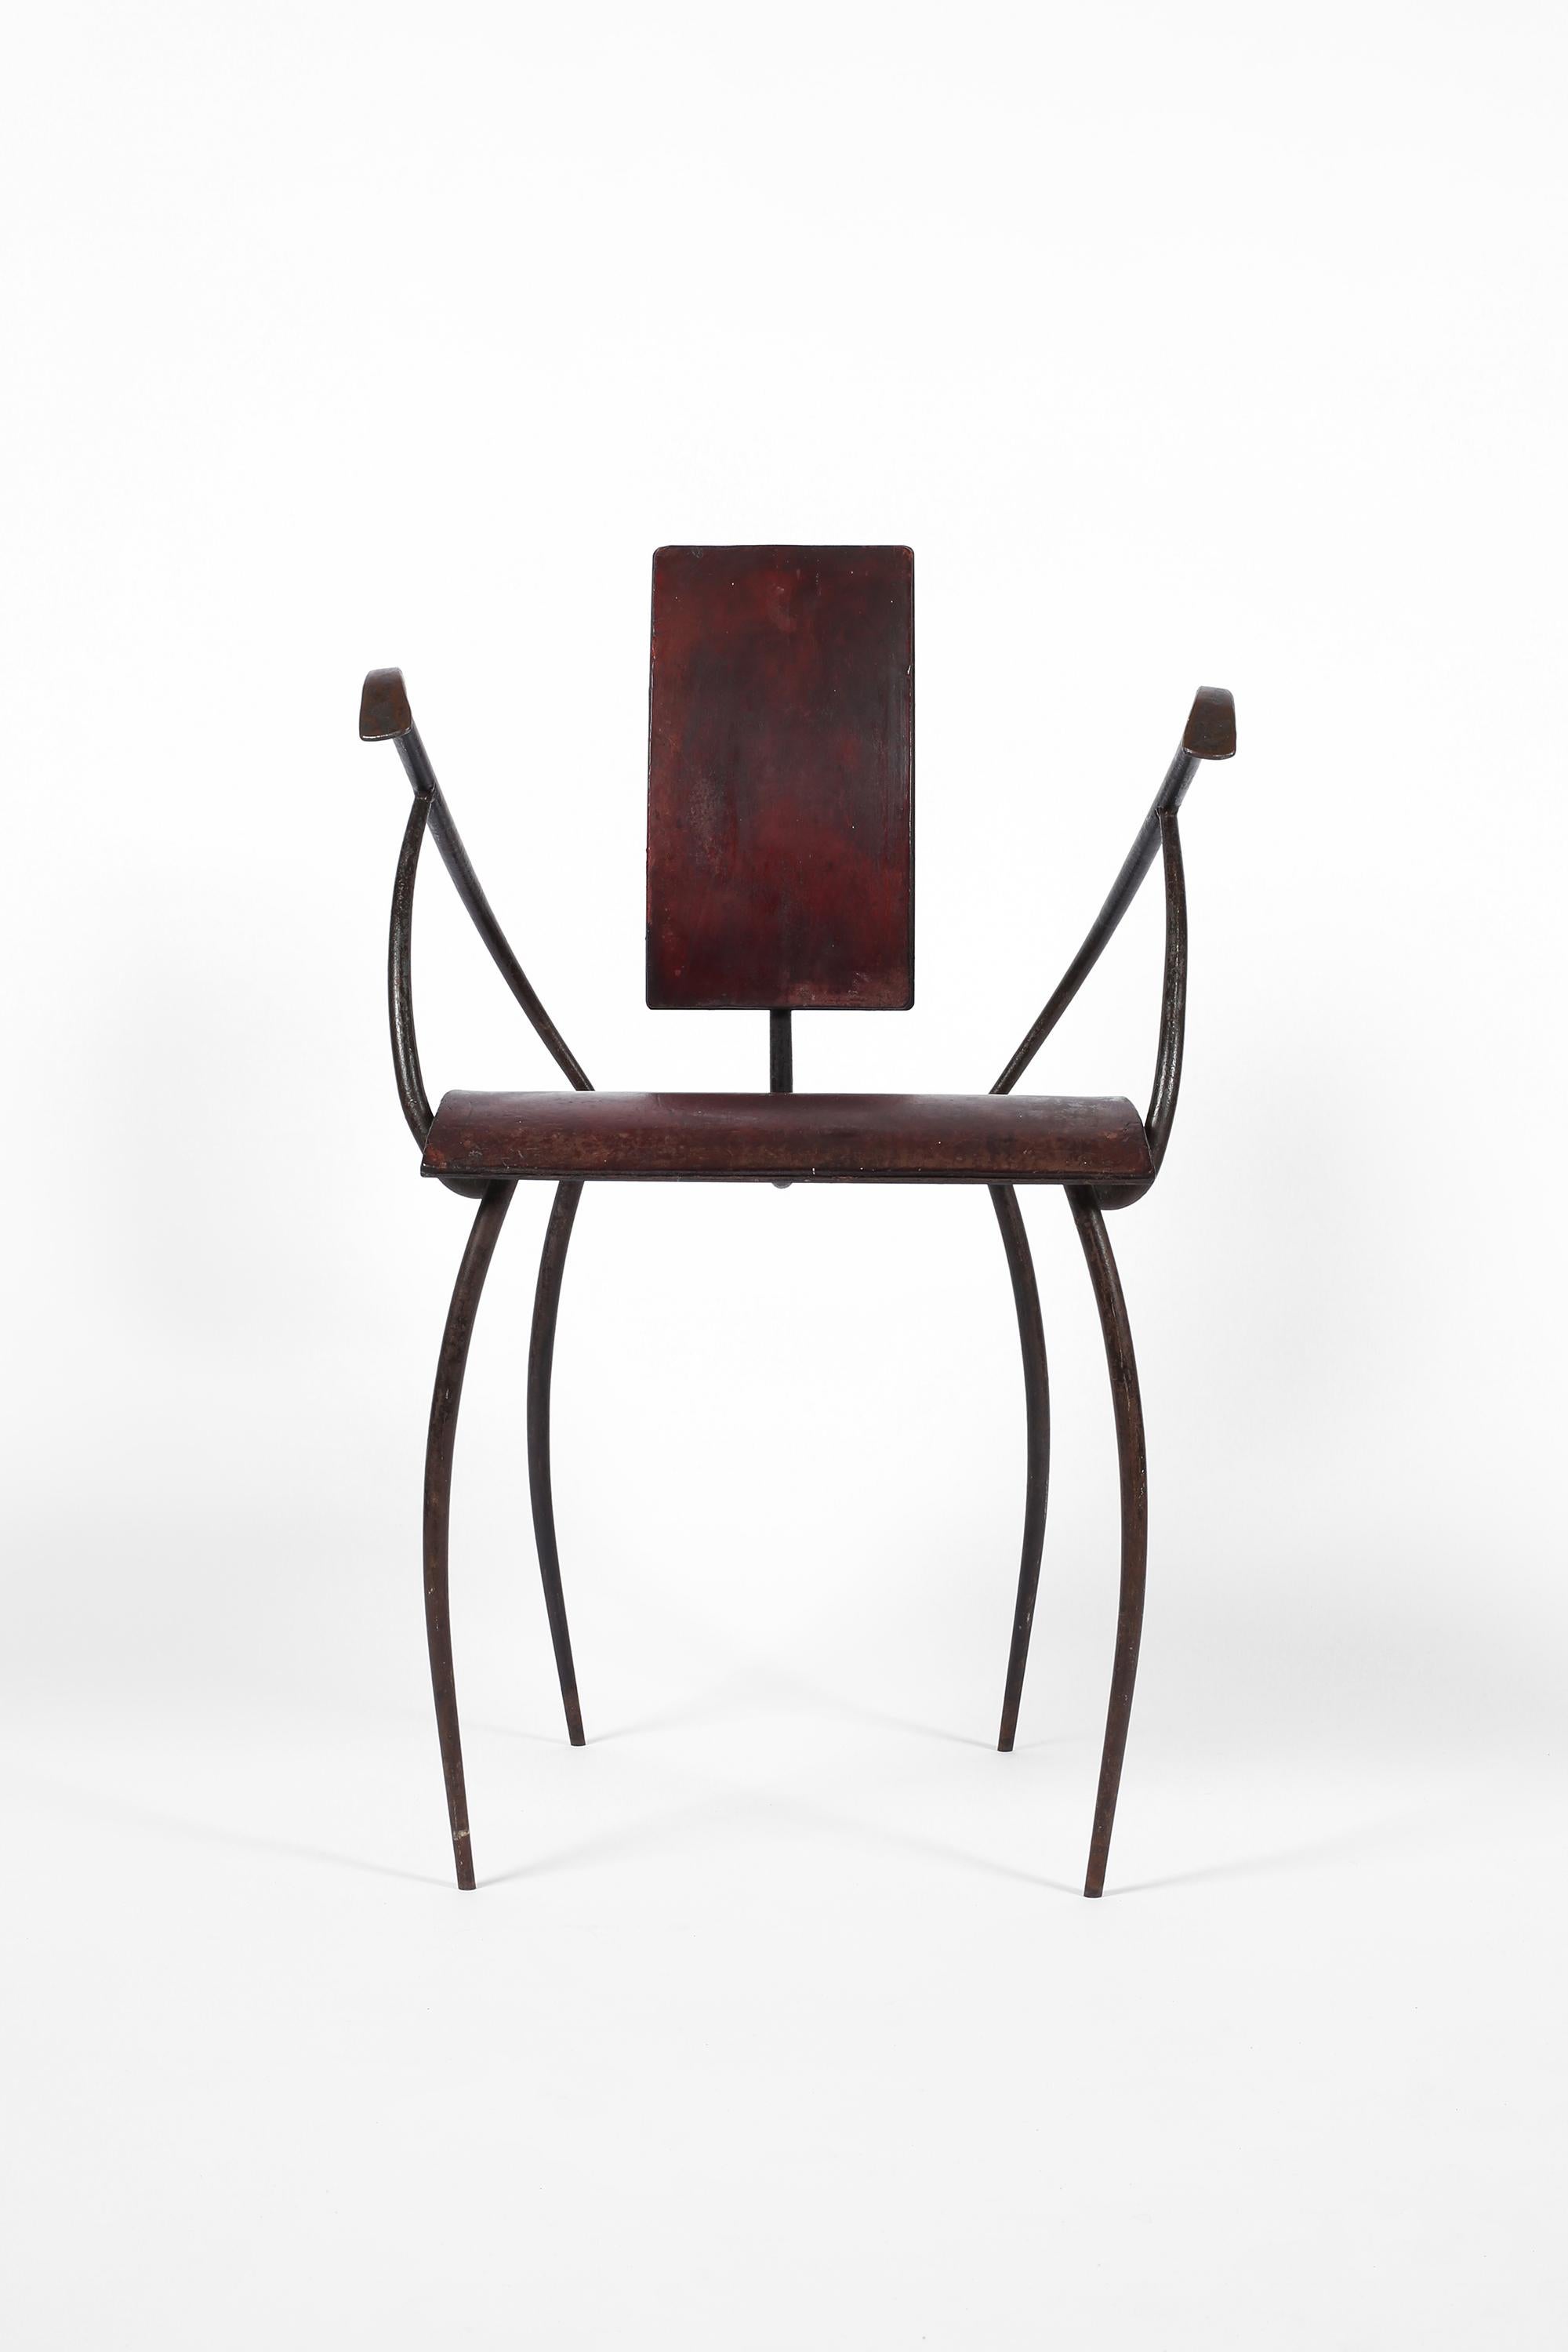 An artisanal modernist occasional chair in wrought iron, with patinated oxblood leather clad seat and backrest. French, c. 1940s.